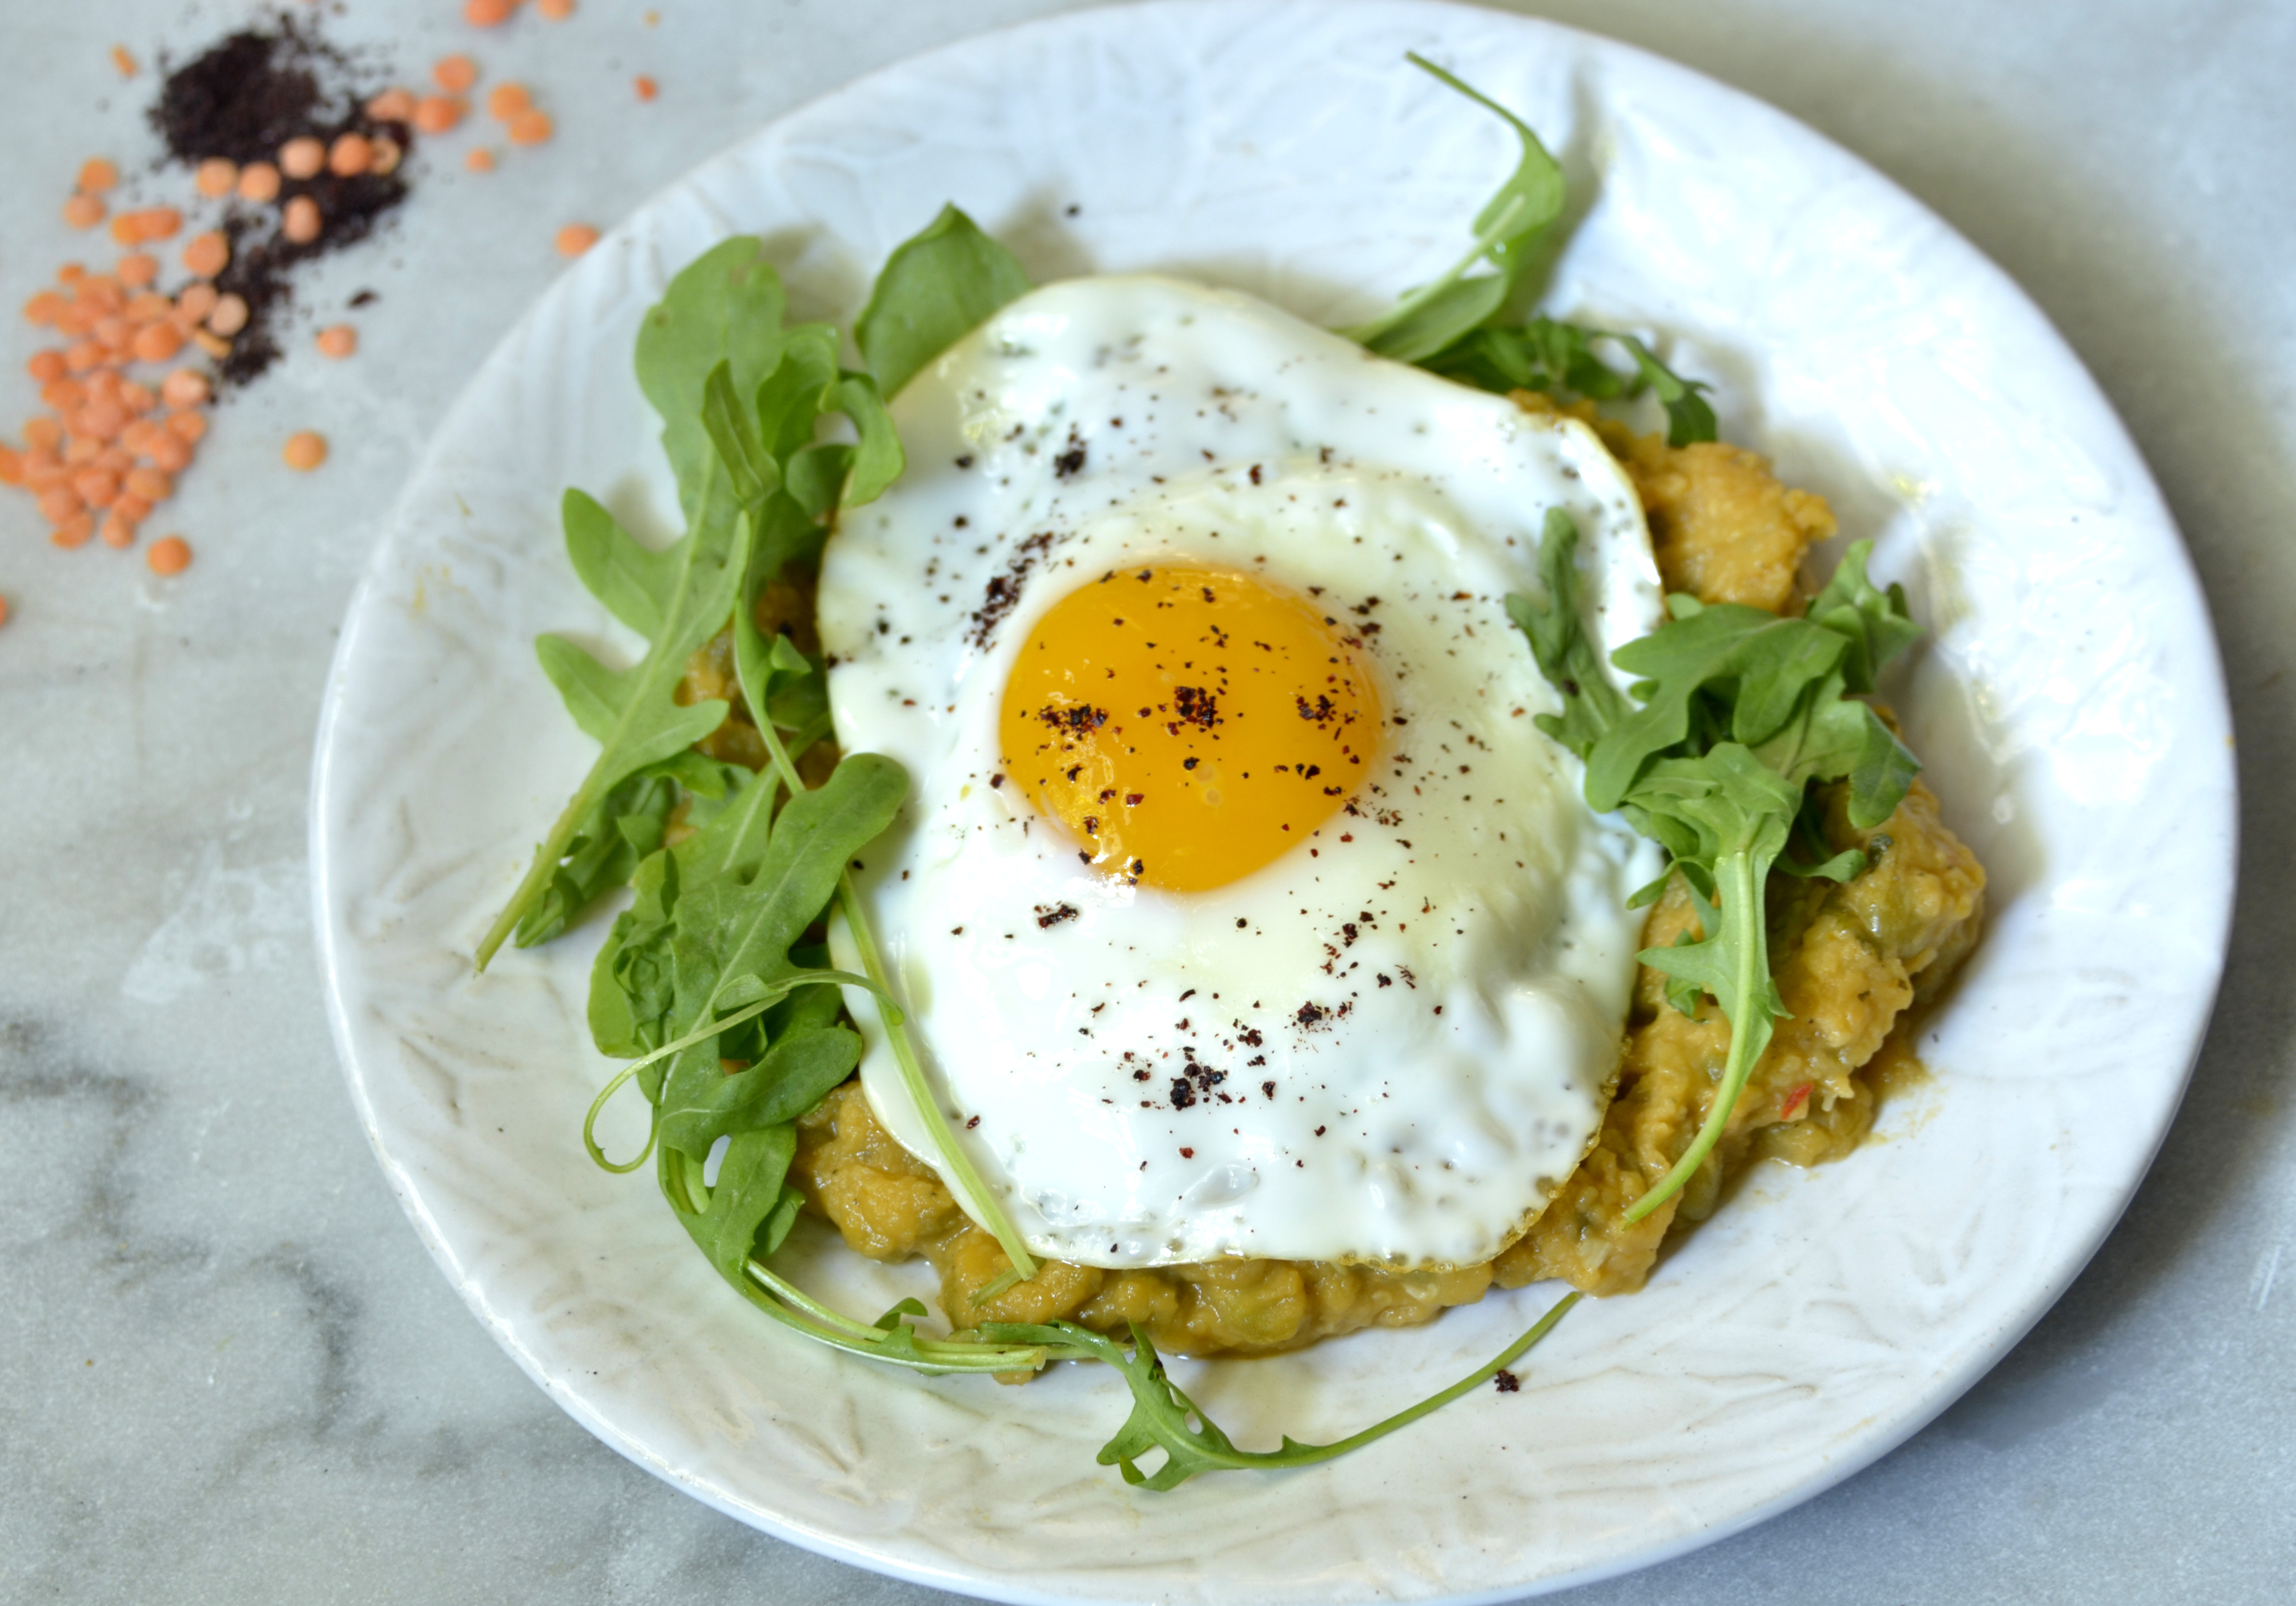 A fast, make ahead nutritious brunch recipe with a kick